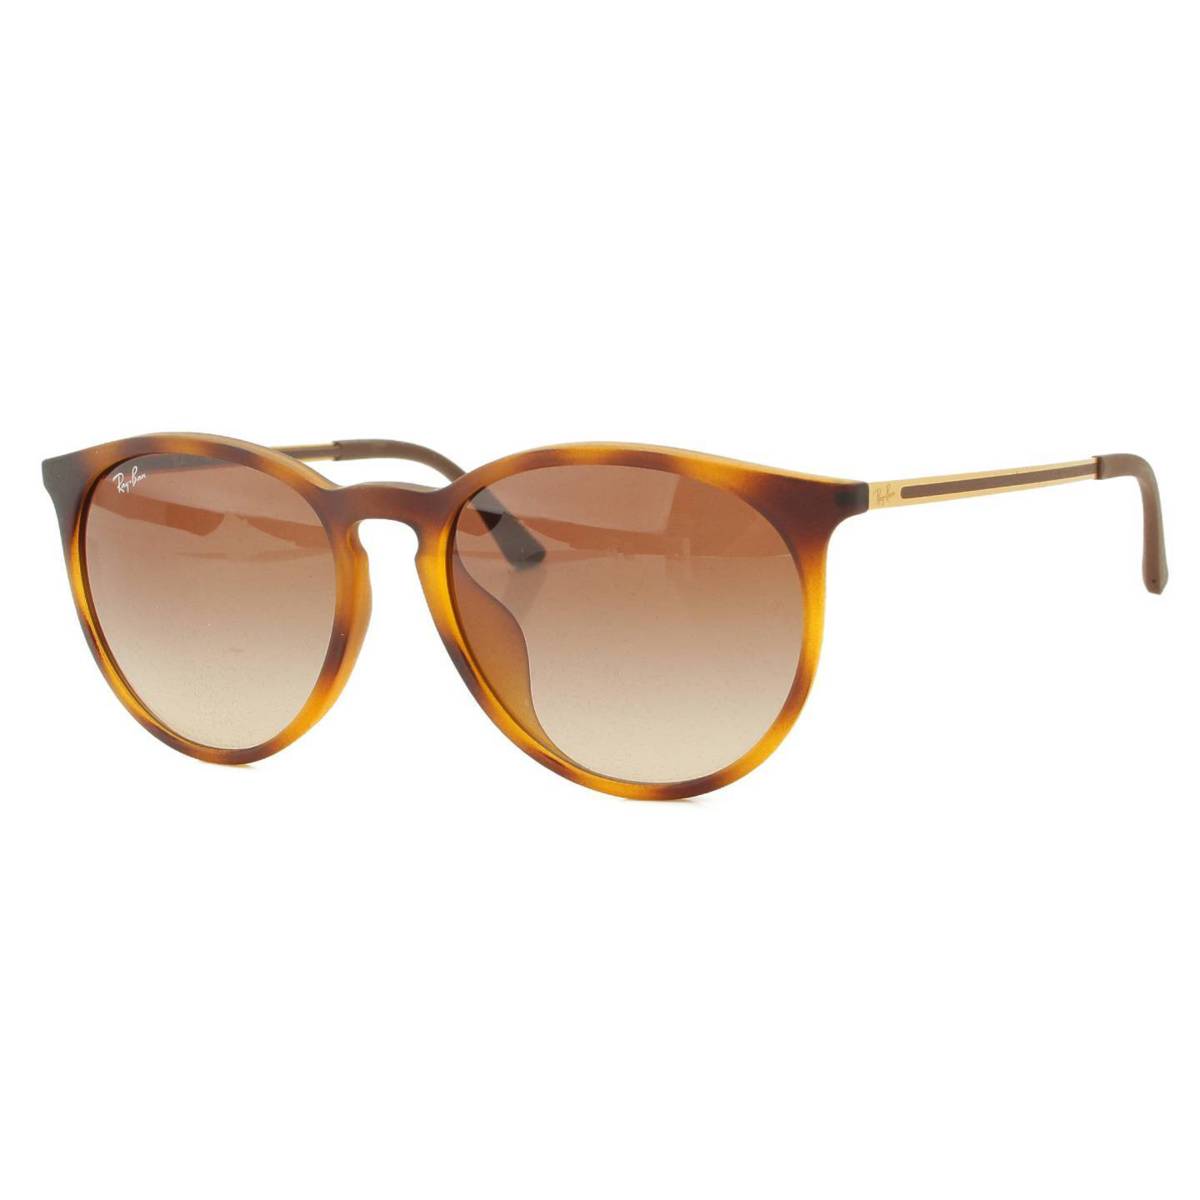 Co(Ray Ban) {Xg Of[V TOX ACEFA ዾ RB4274 uE 5718